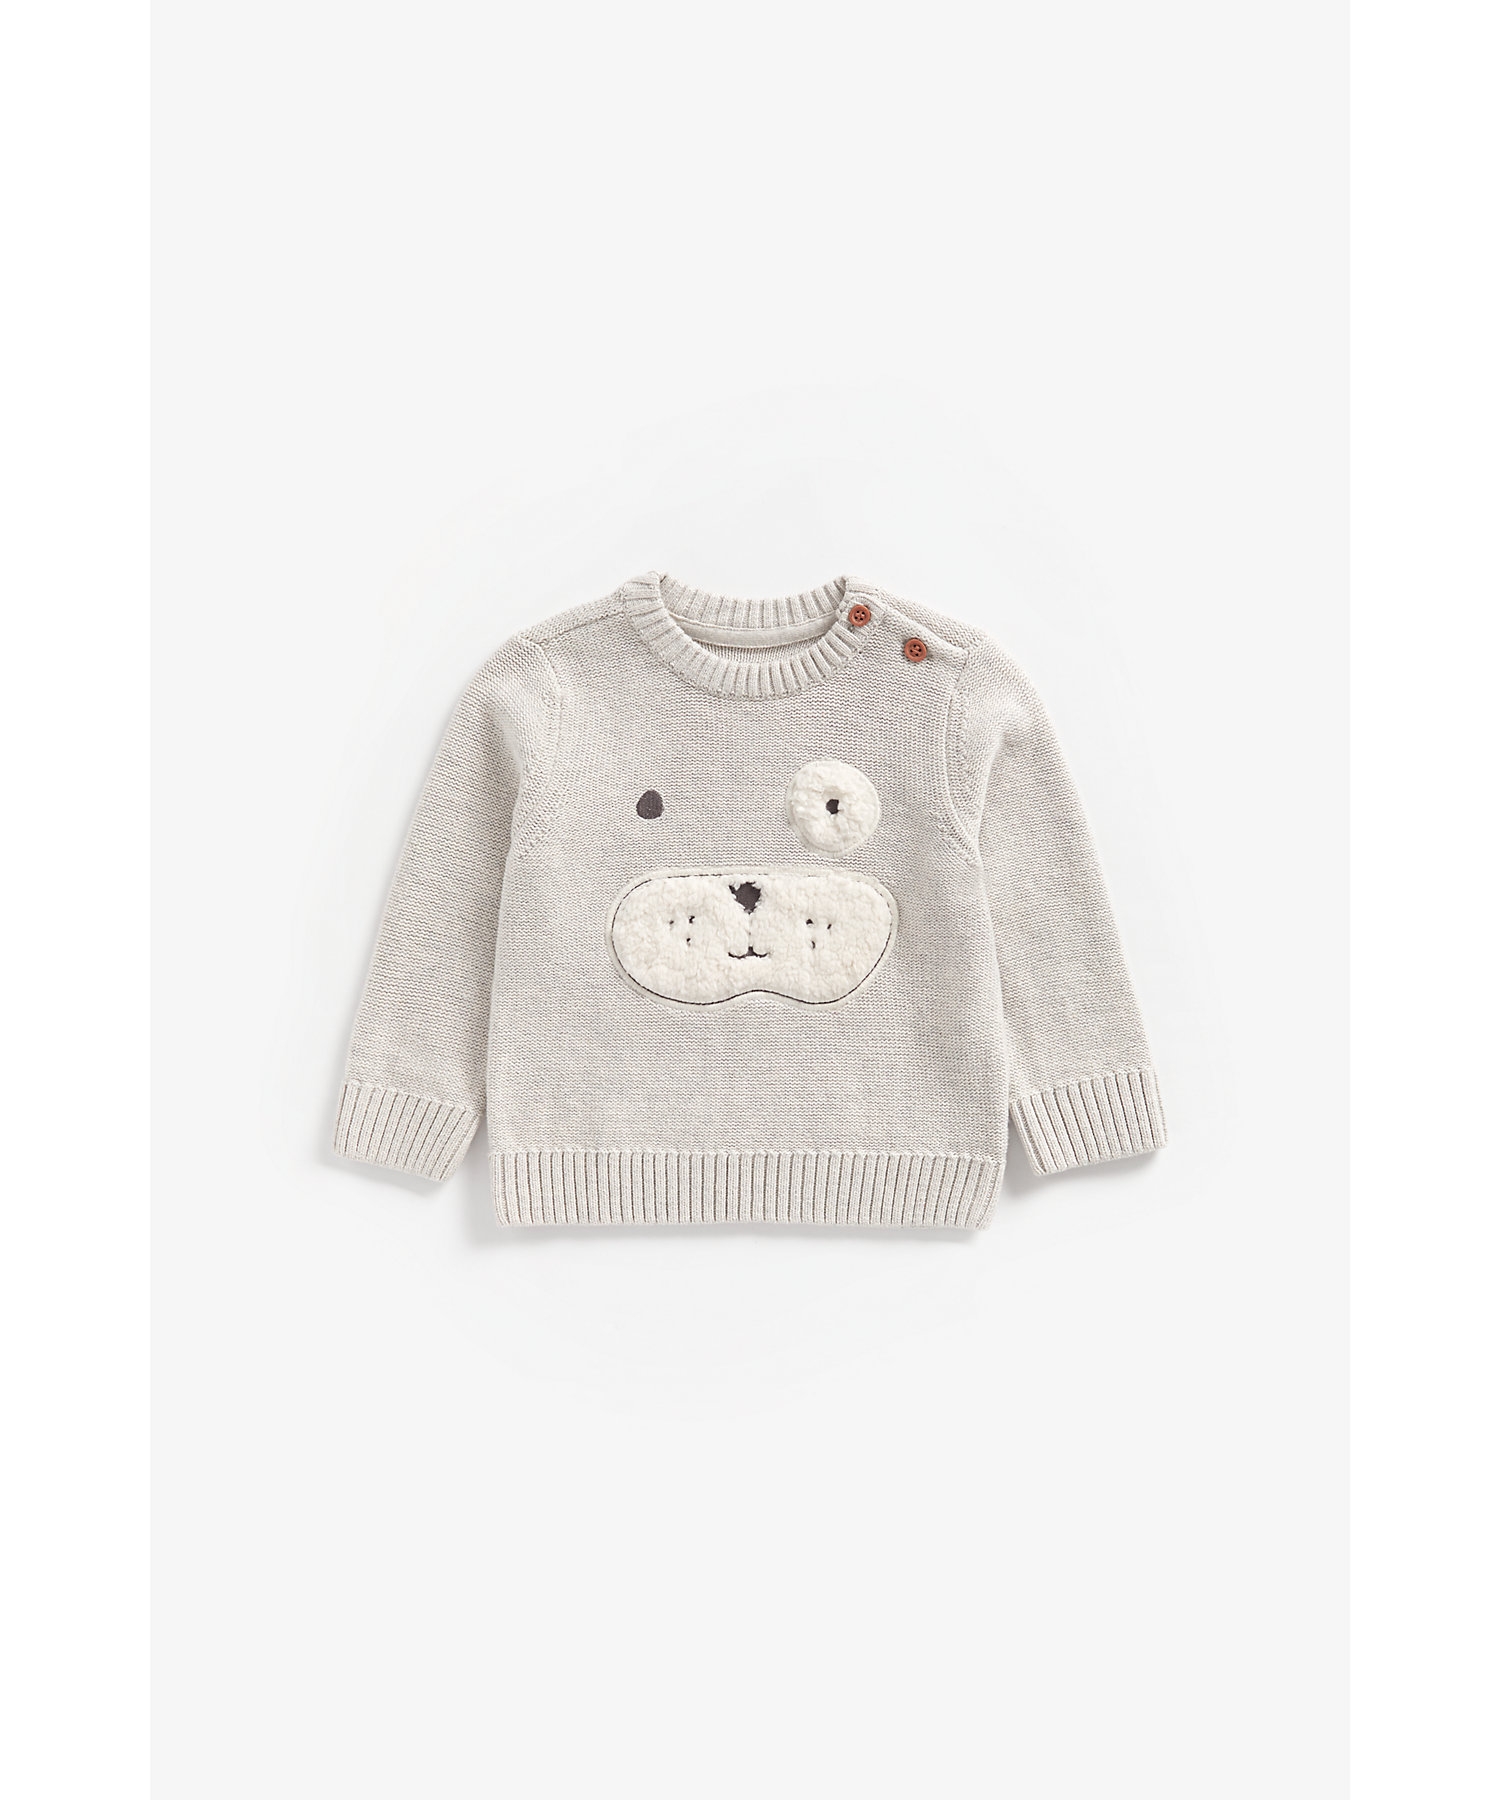 Mothercare | Boys Full Sleeves Sweater Puppy Patchwork - Grey 0